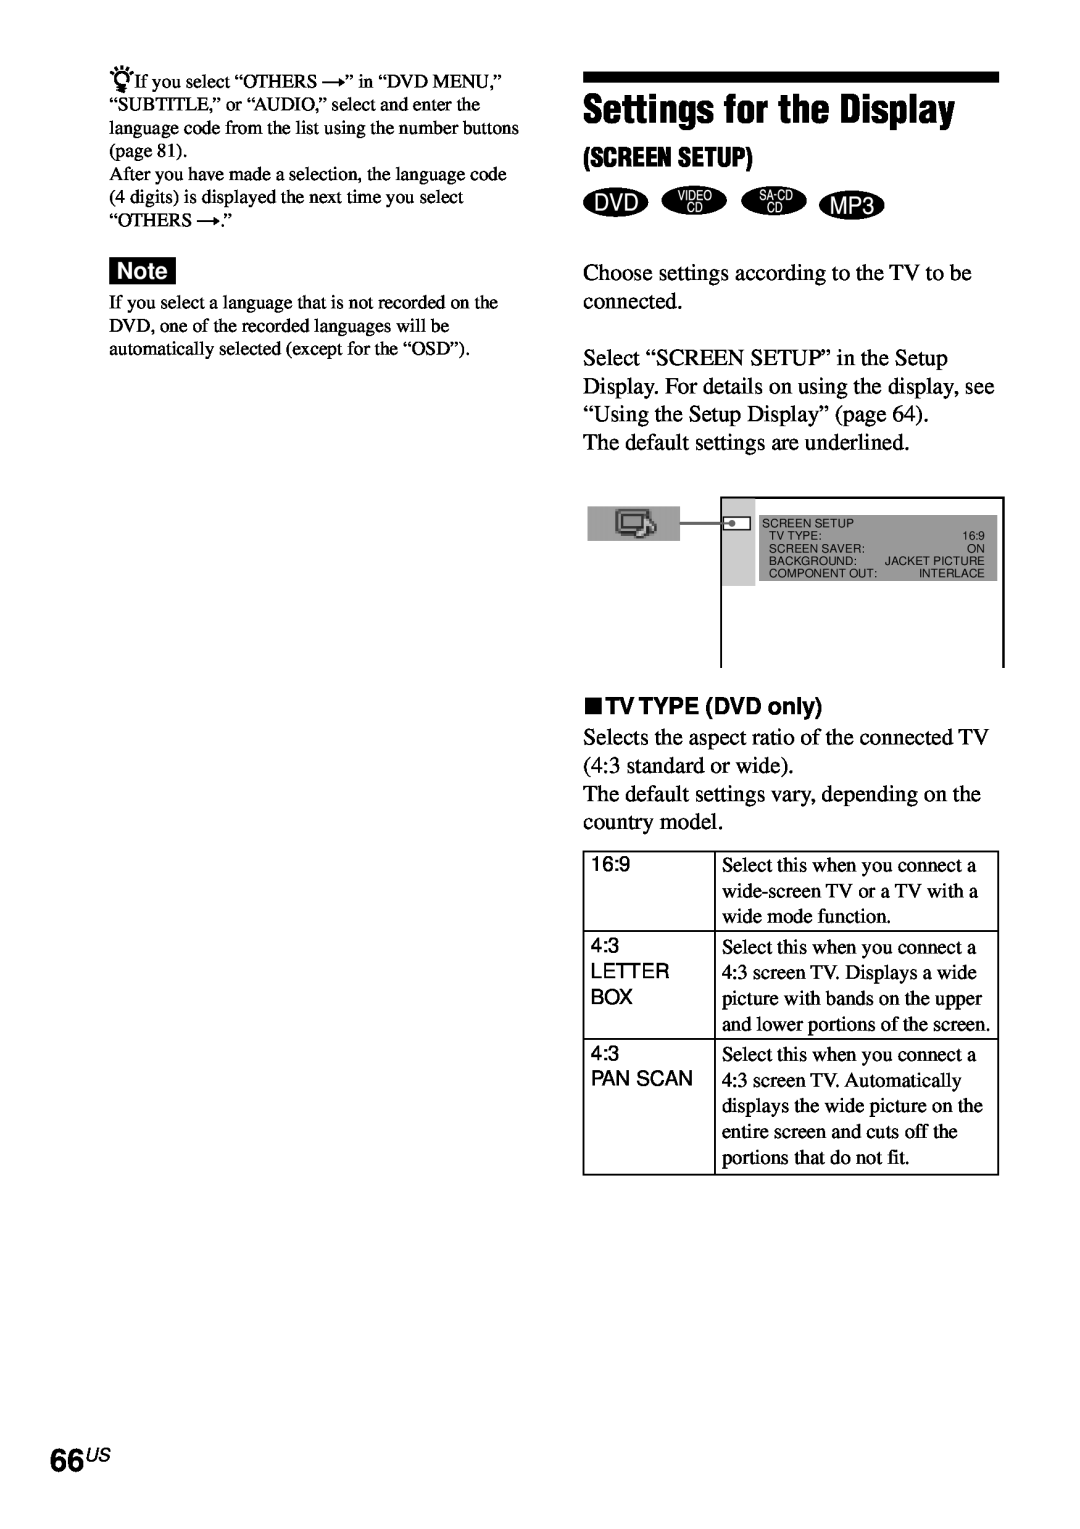 Sony AVD-S50ES operating instructions Settings for the Display, 66US, Screen Setup, xTV TYPE DVD only 